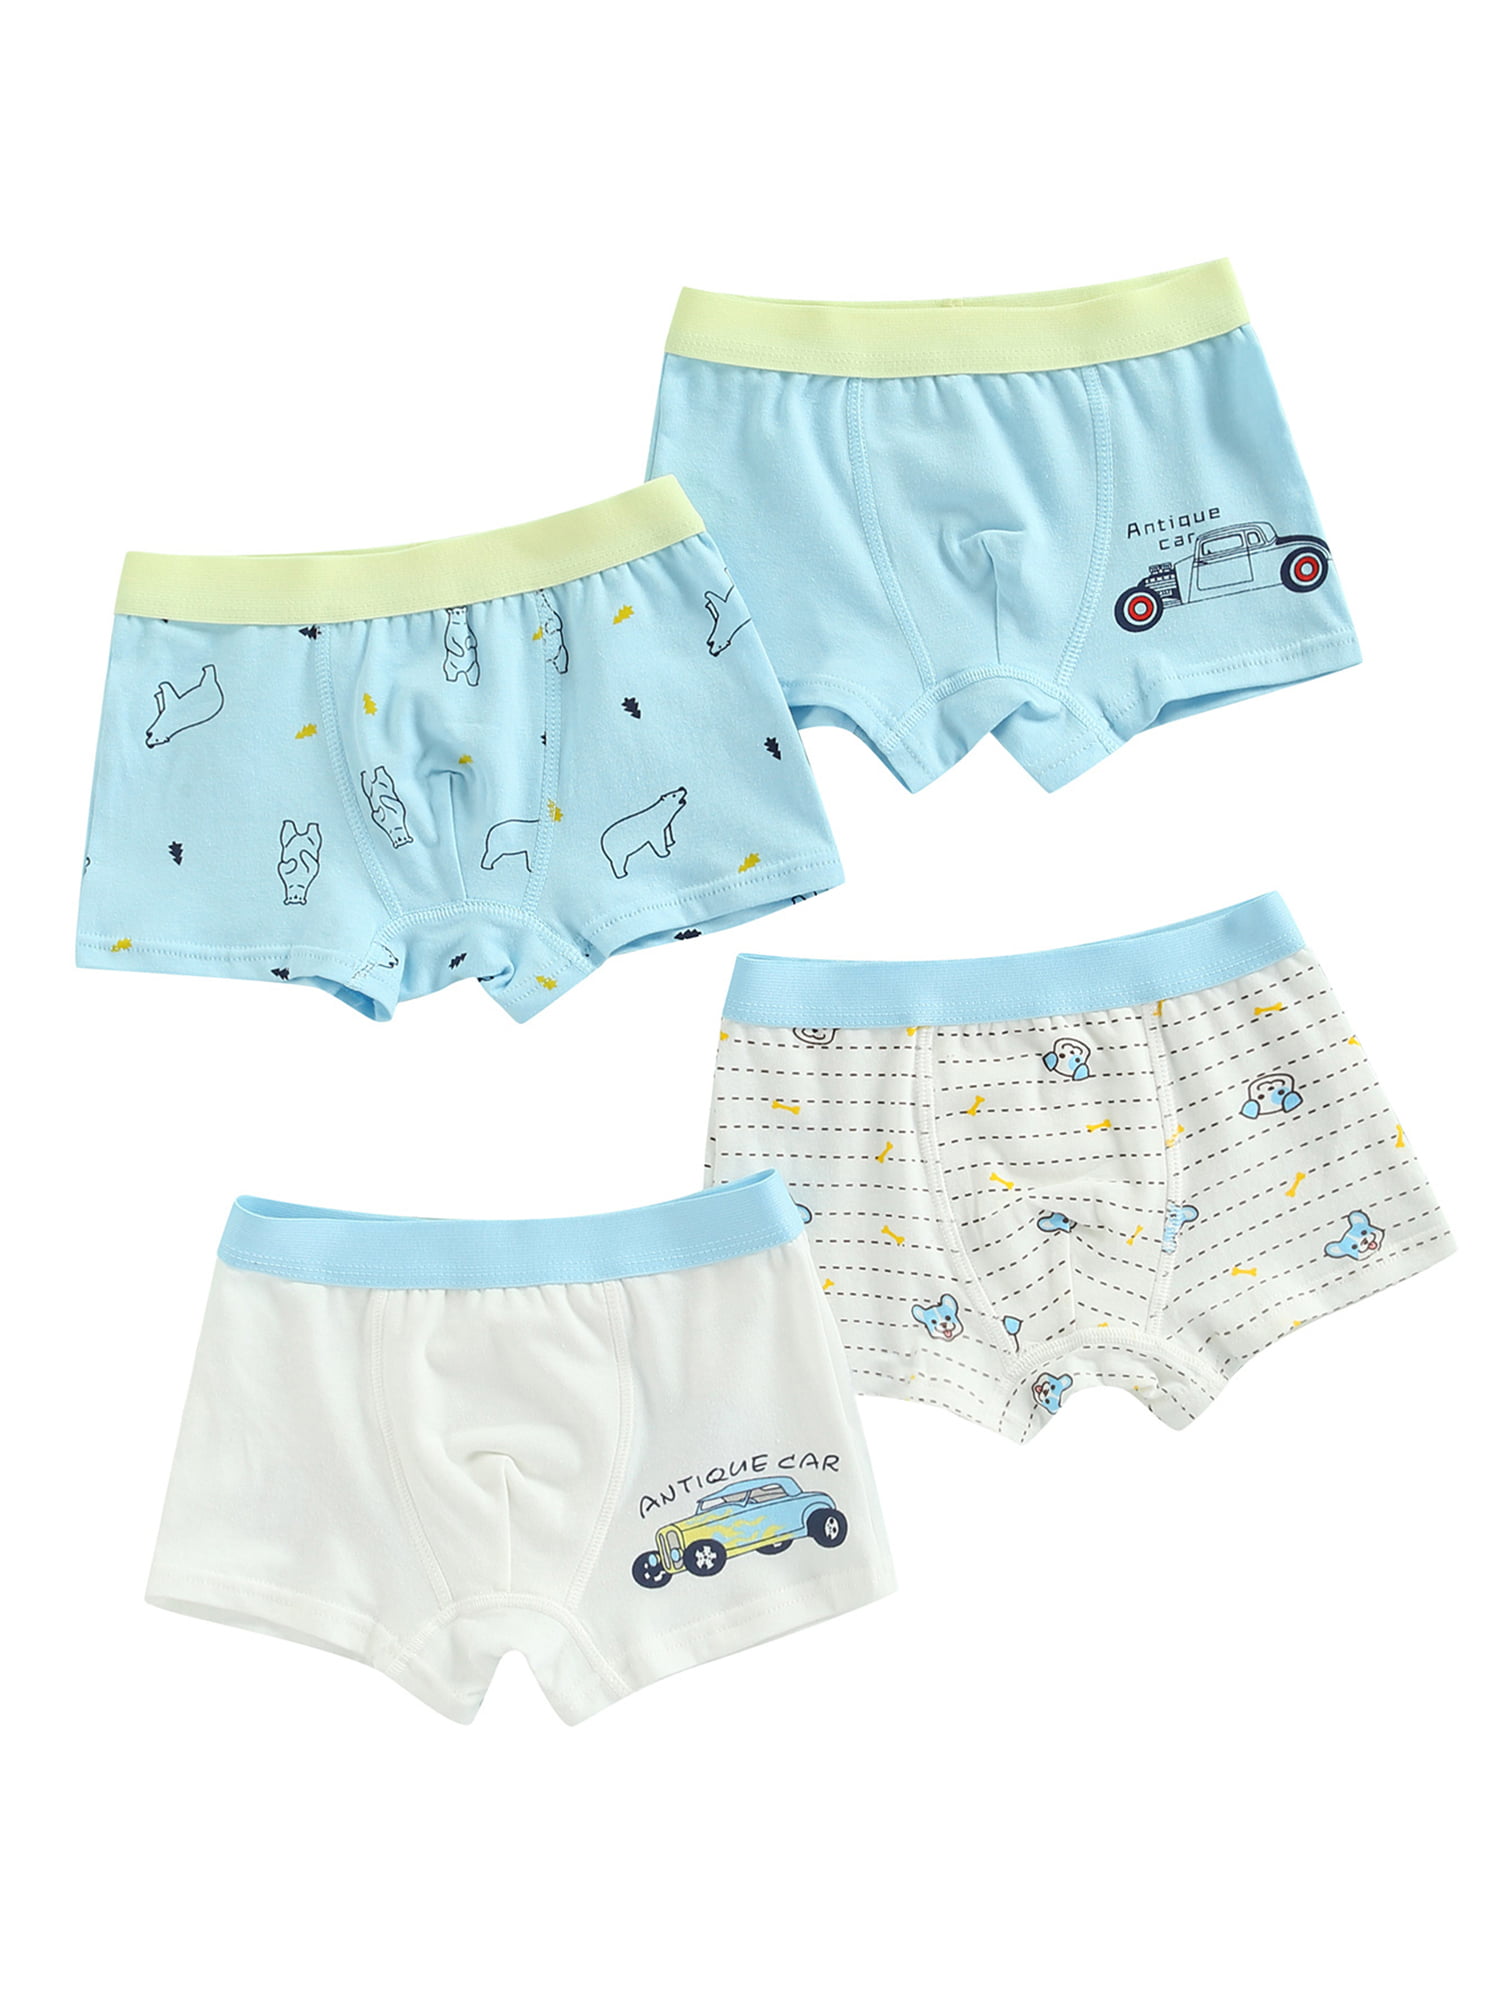 Boxer Shorts 3 Pack Boys Knitted Pants Knickers Briefs Size 5-12 years Blue/Grey 